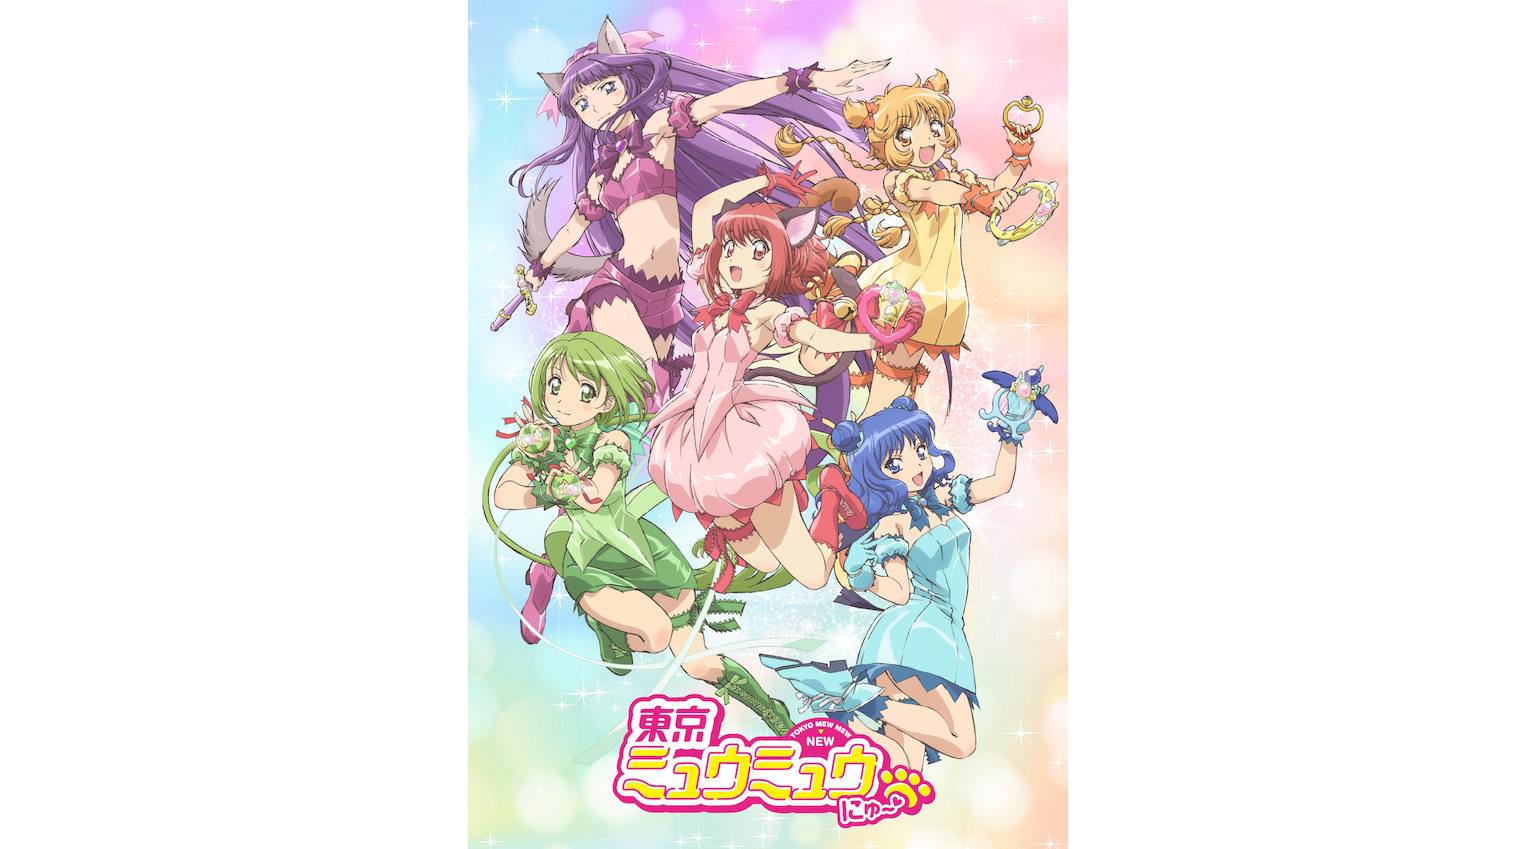 NEW Tokyo Mew Mew New Official Visual Book | JAPAN Anime